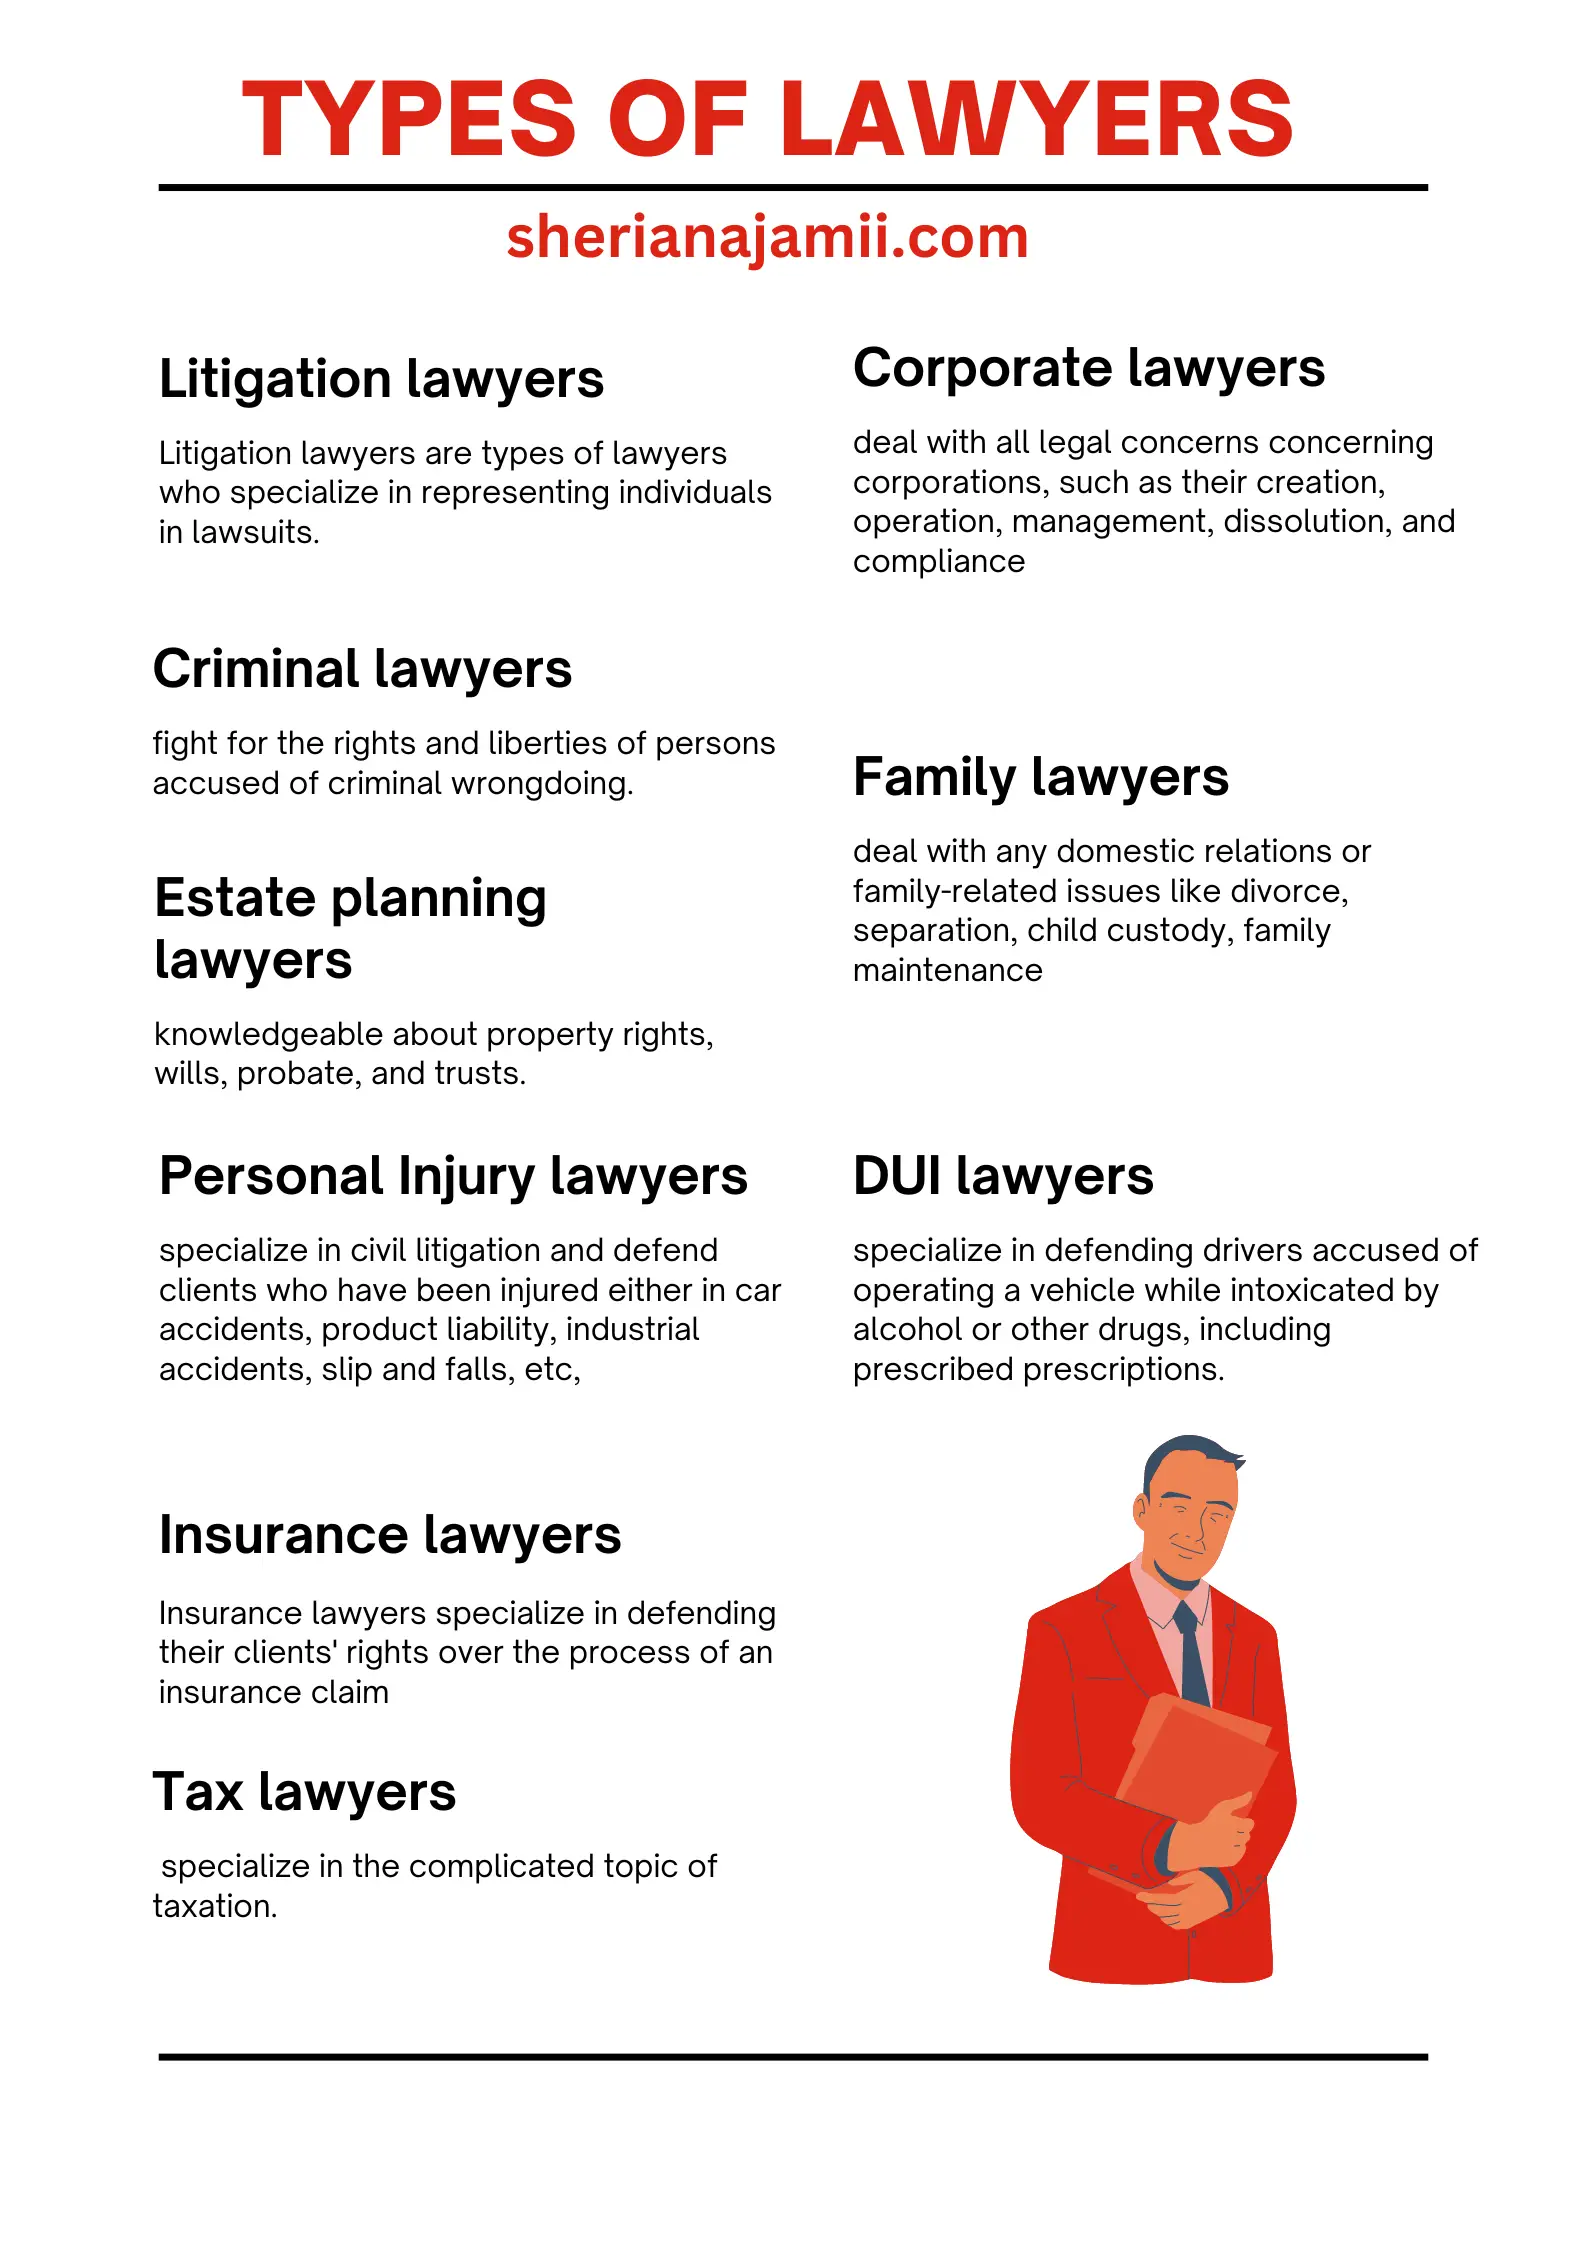 types of lawyers, types of attorneys